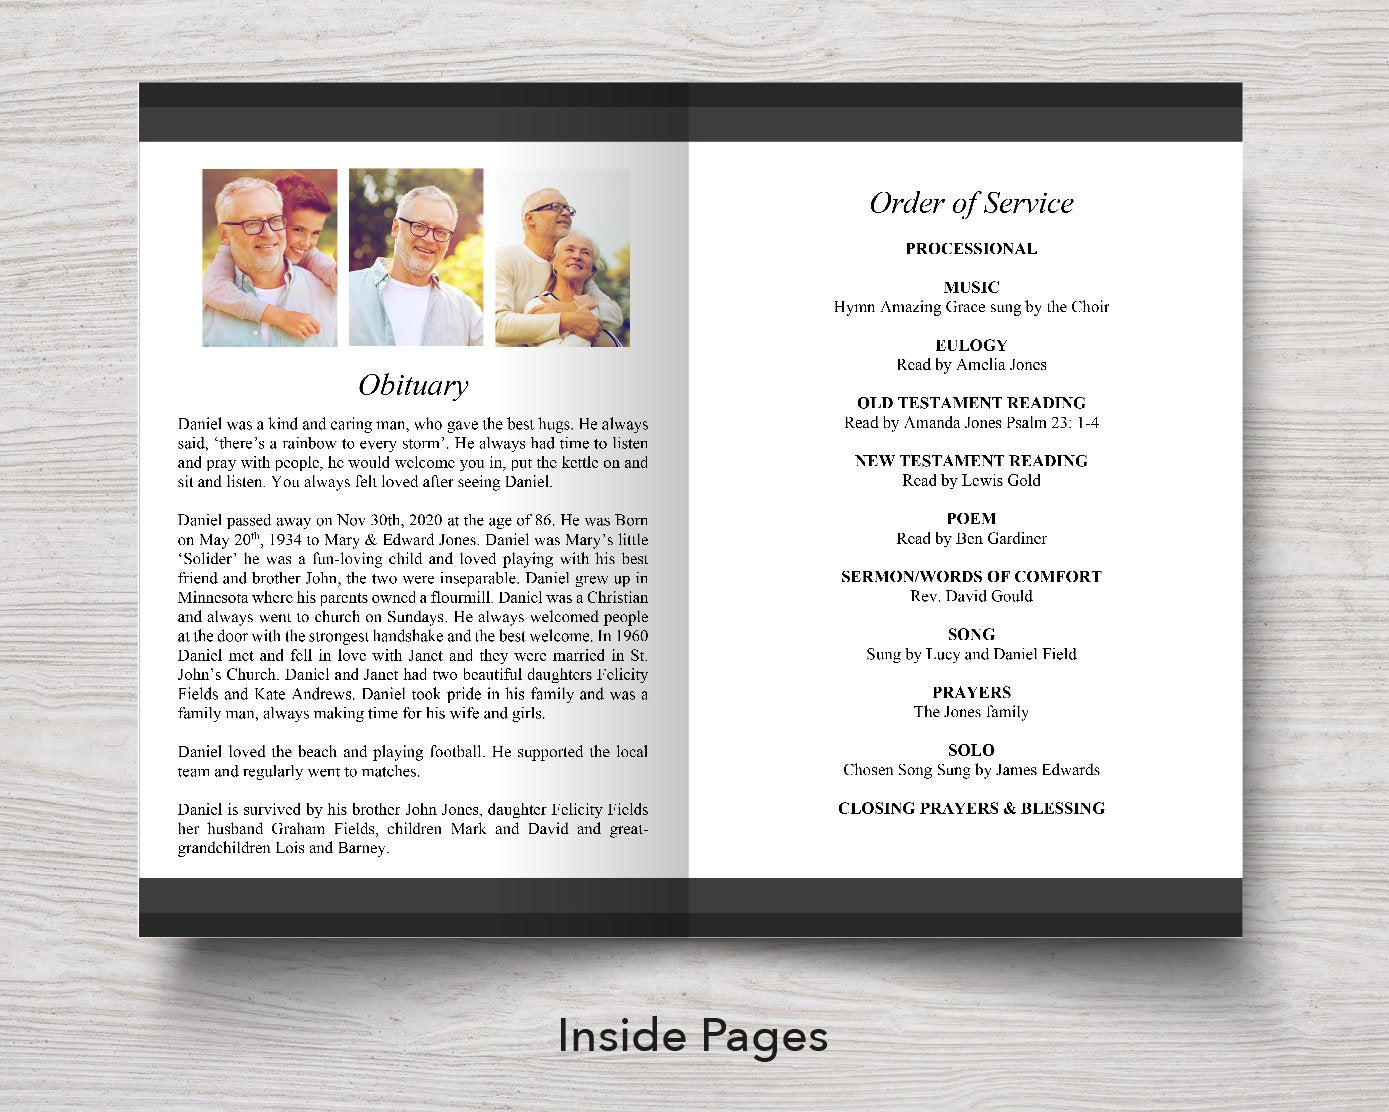 8 Page Classic Grey Funeral Program Template